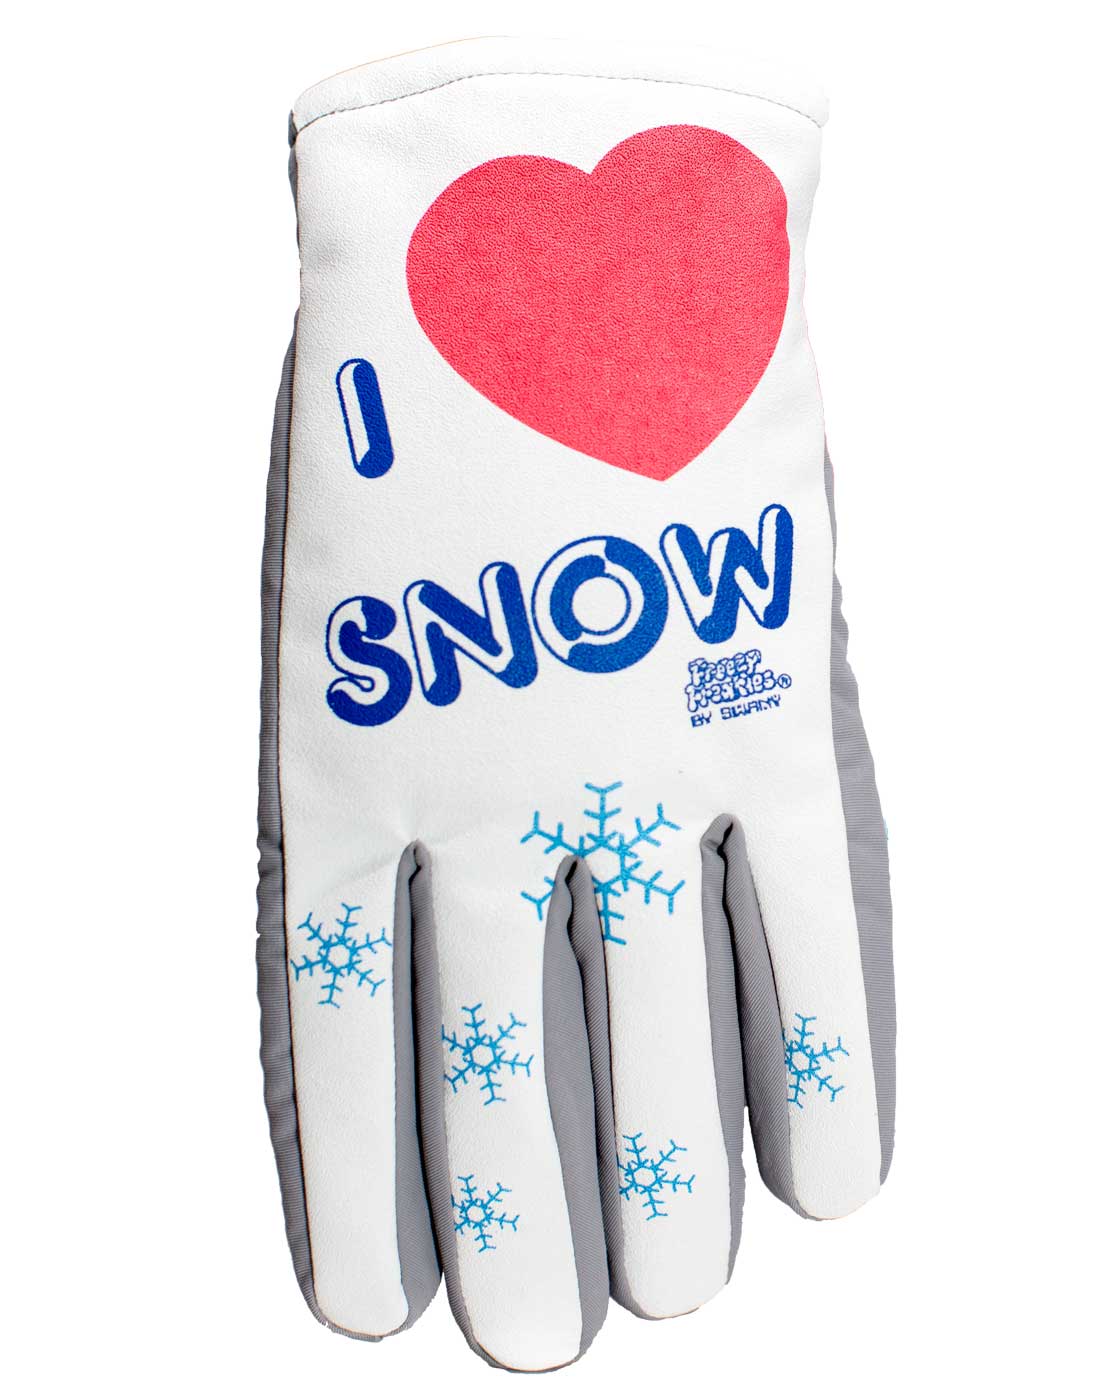 I Love Snow Freezy Freakies gloves with red heart and blue snowflakes